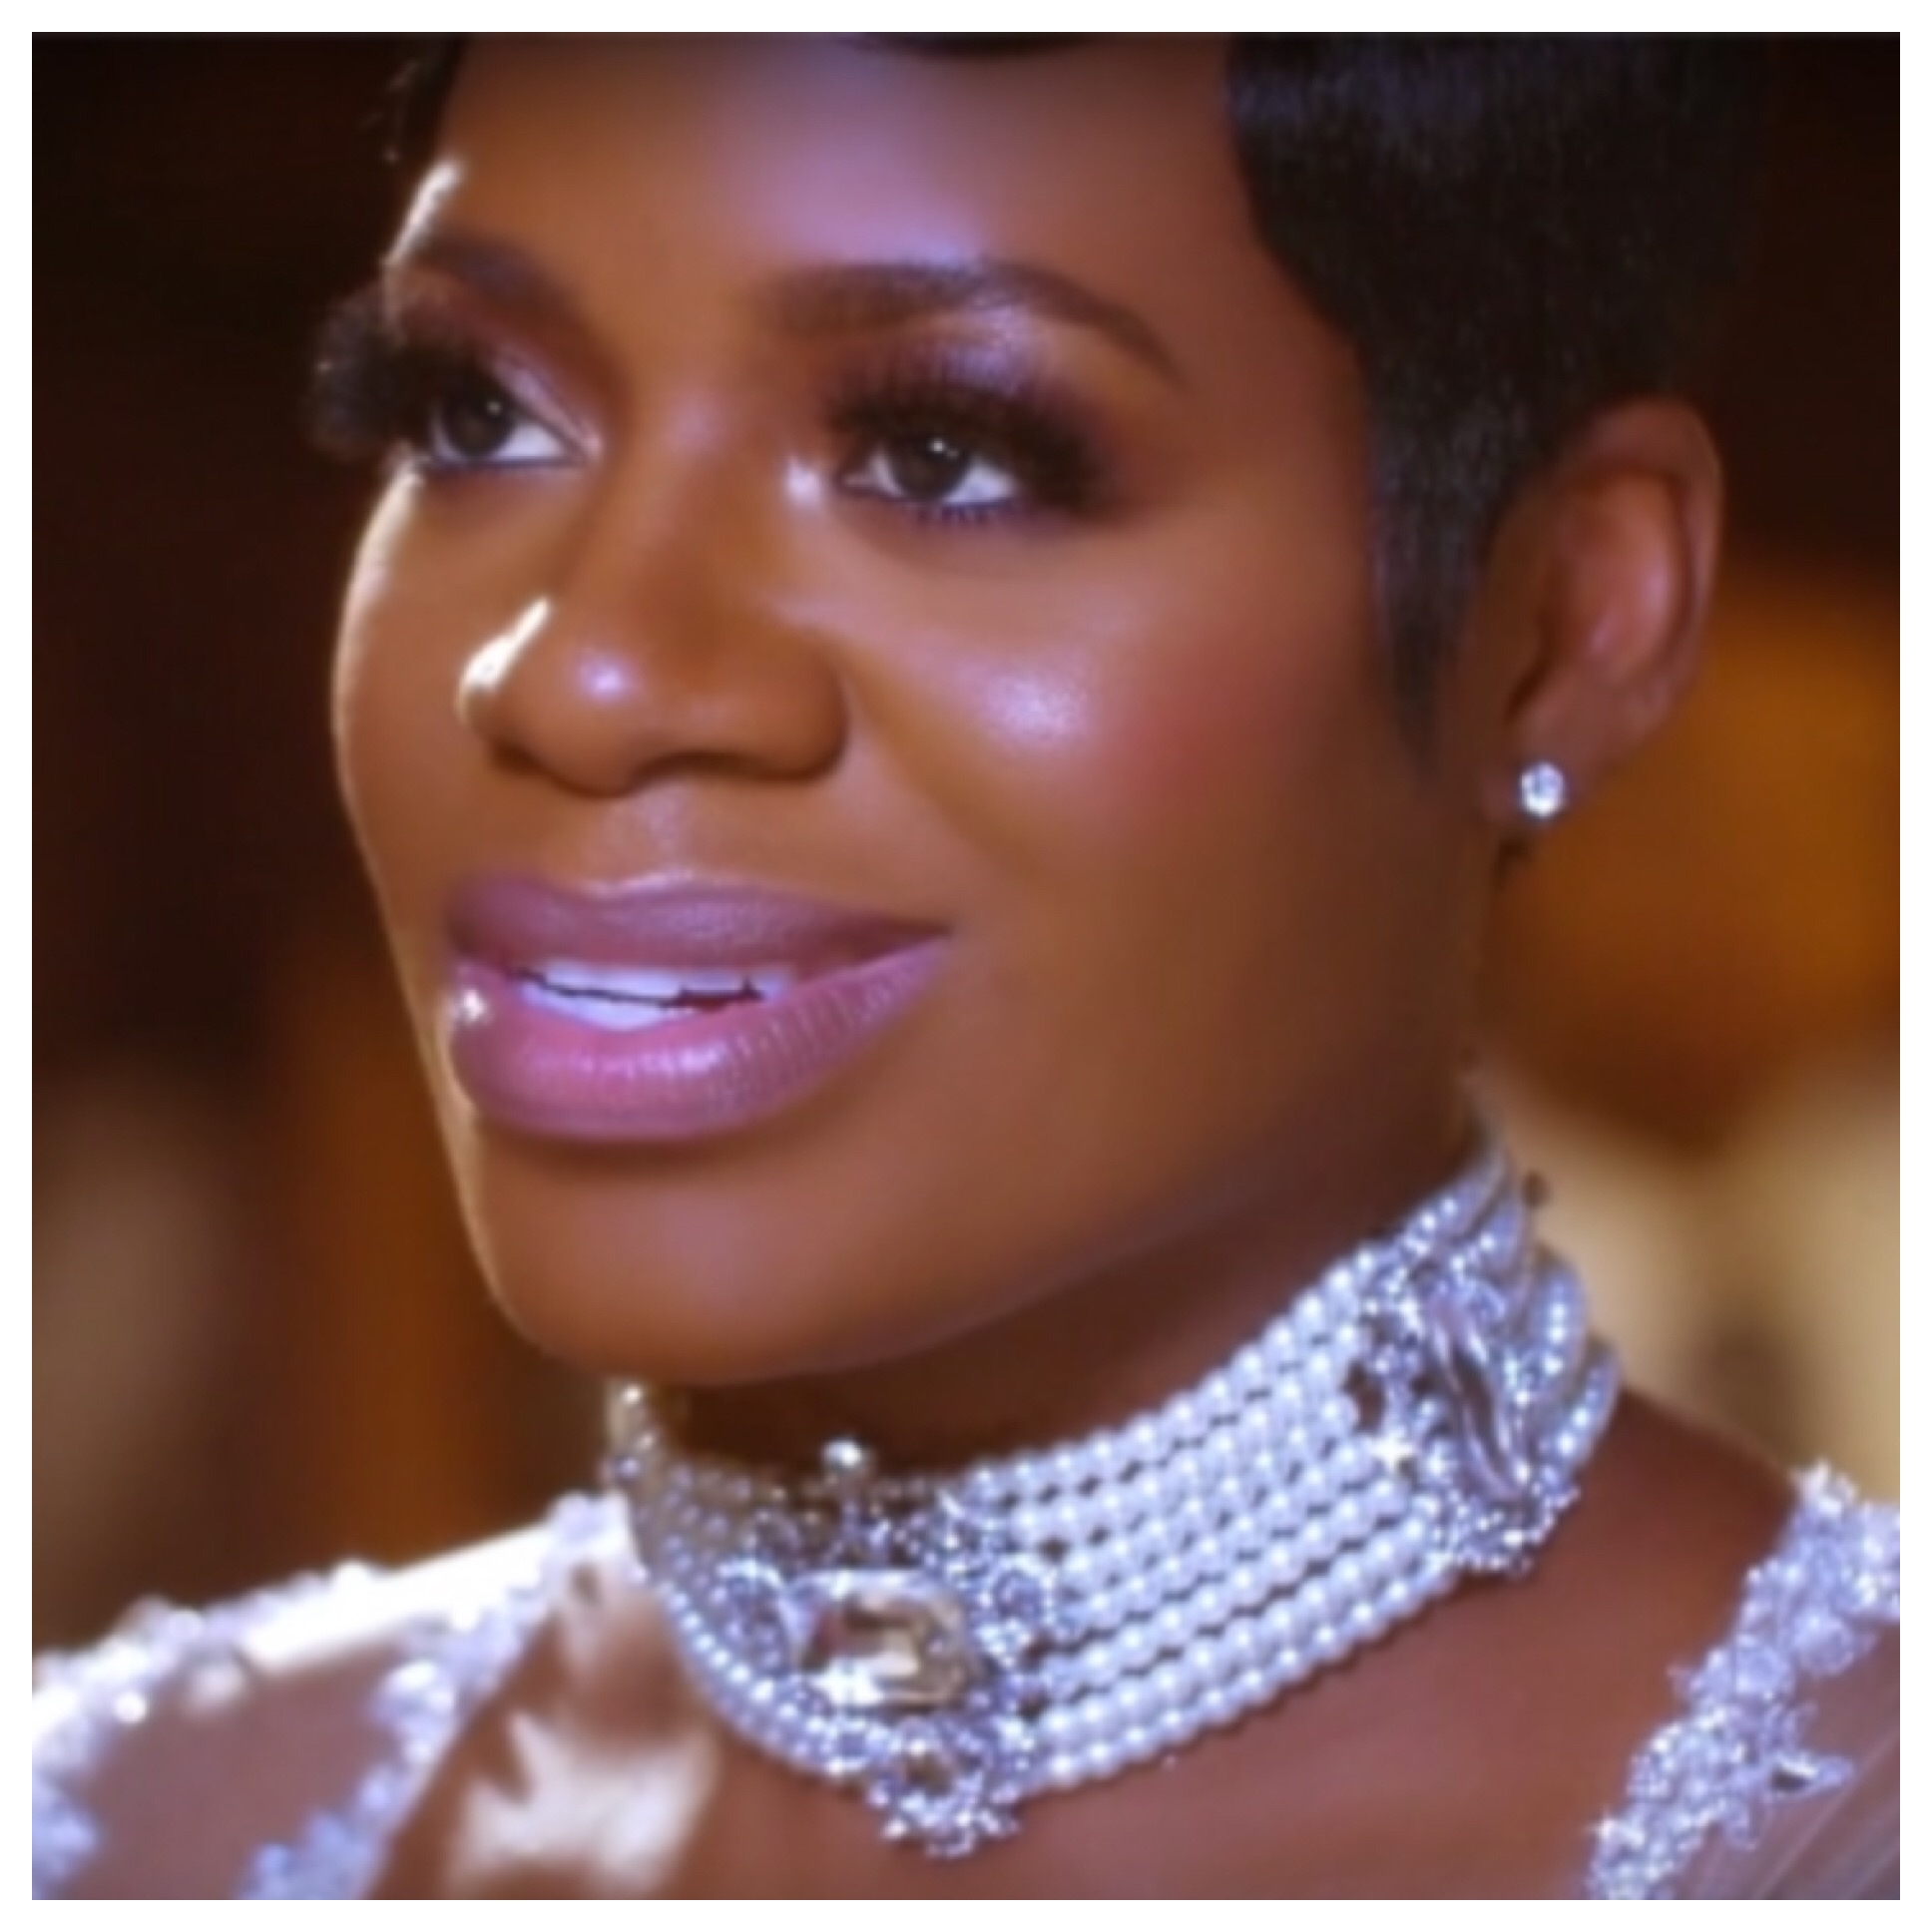 Fantasia Debuts New Music Video Featuring RHOA Star Sheree Whitfield’s FINE Son!